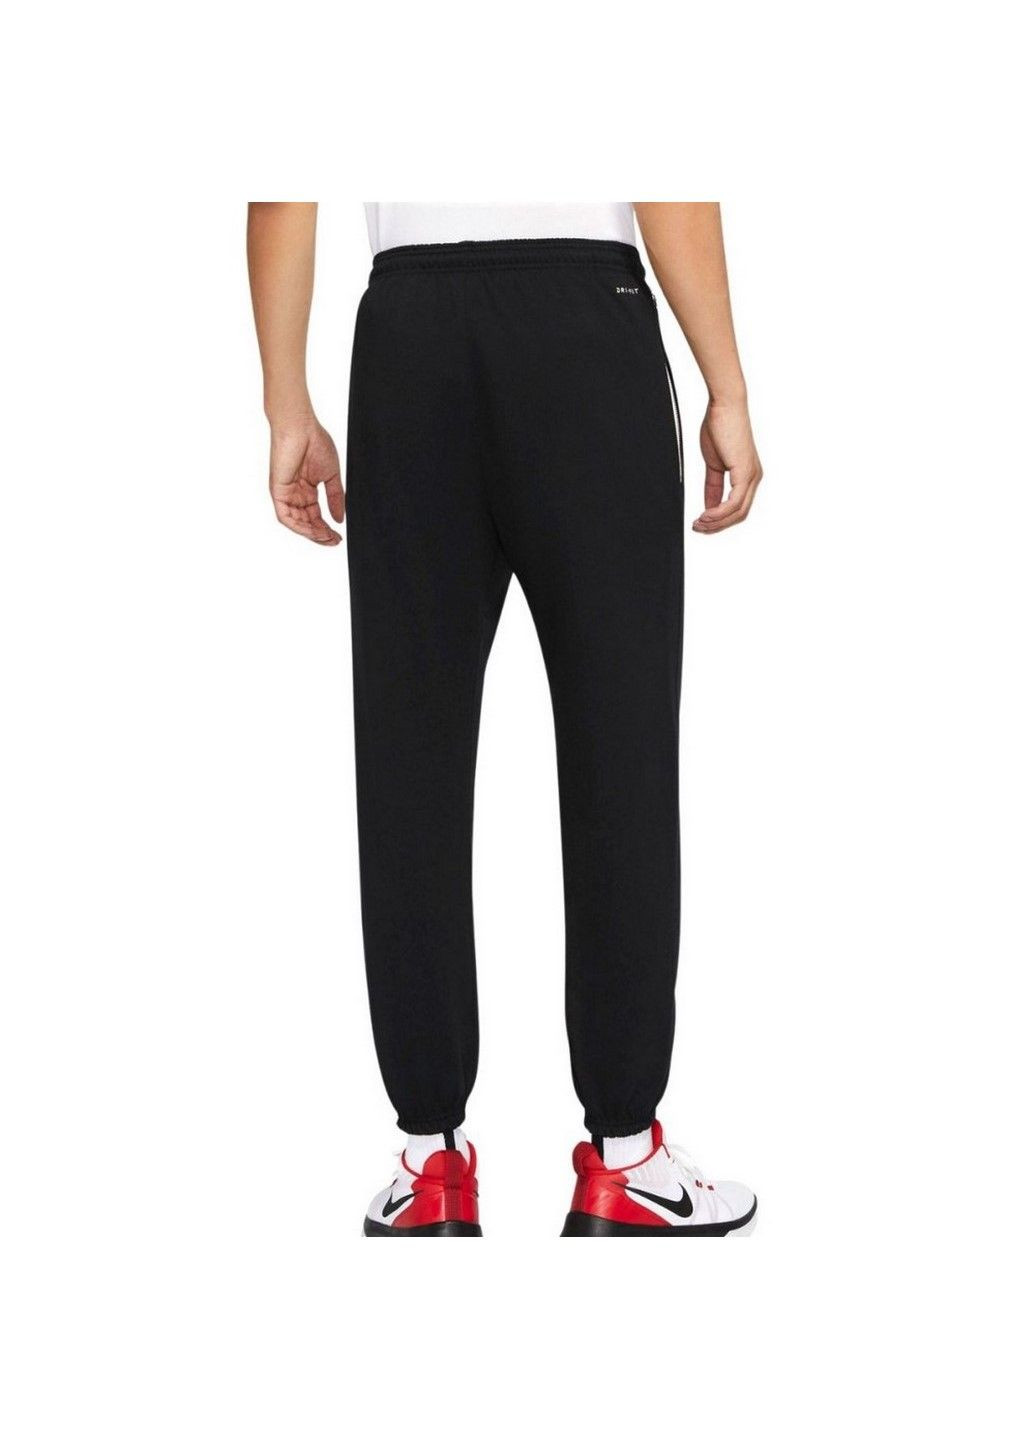 Штани M NK DF STD ISSUE PANT CK6365-010 Nike (285794628)